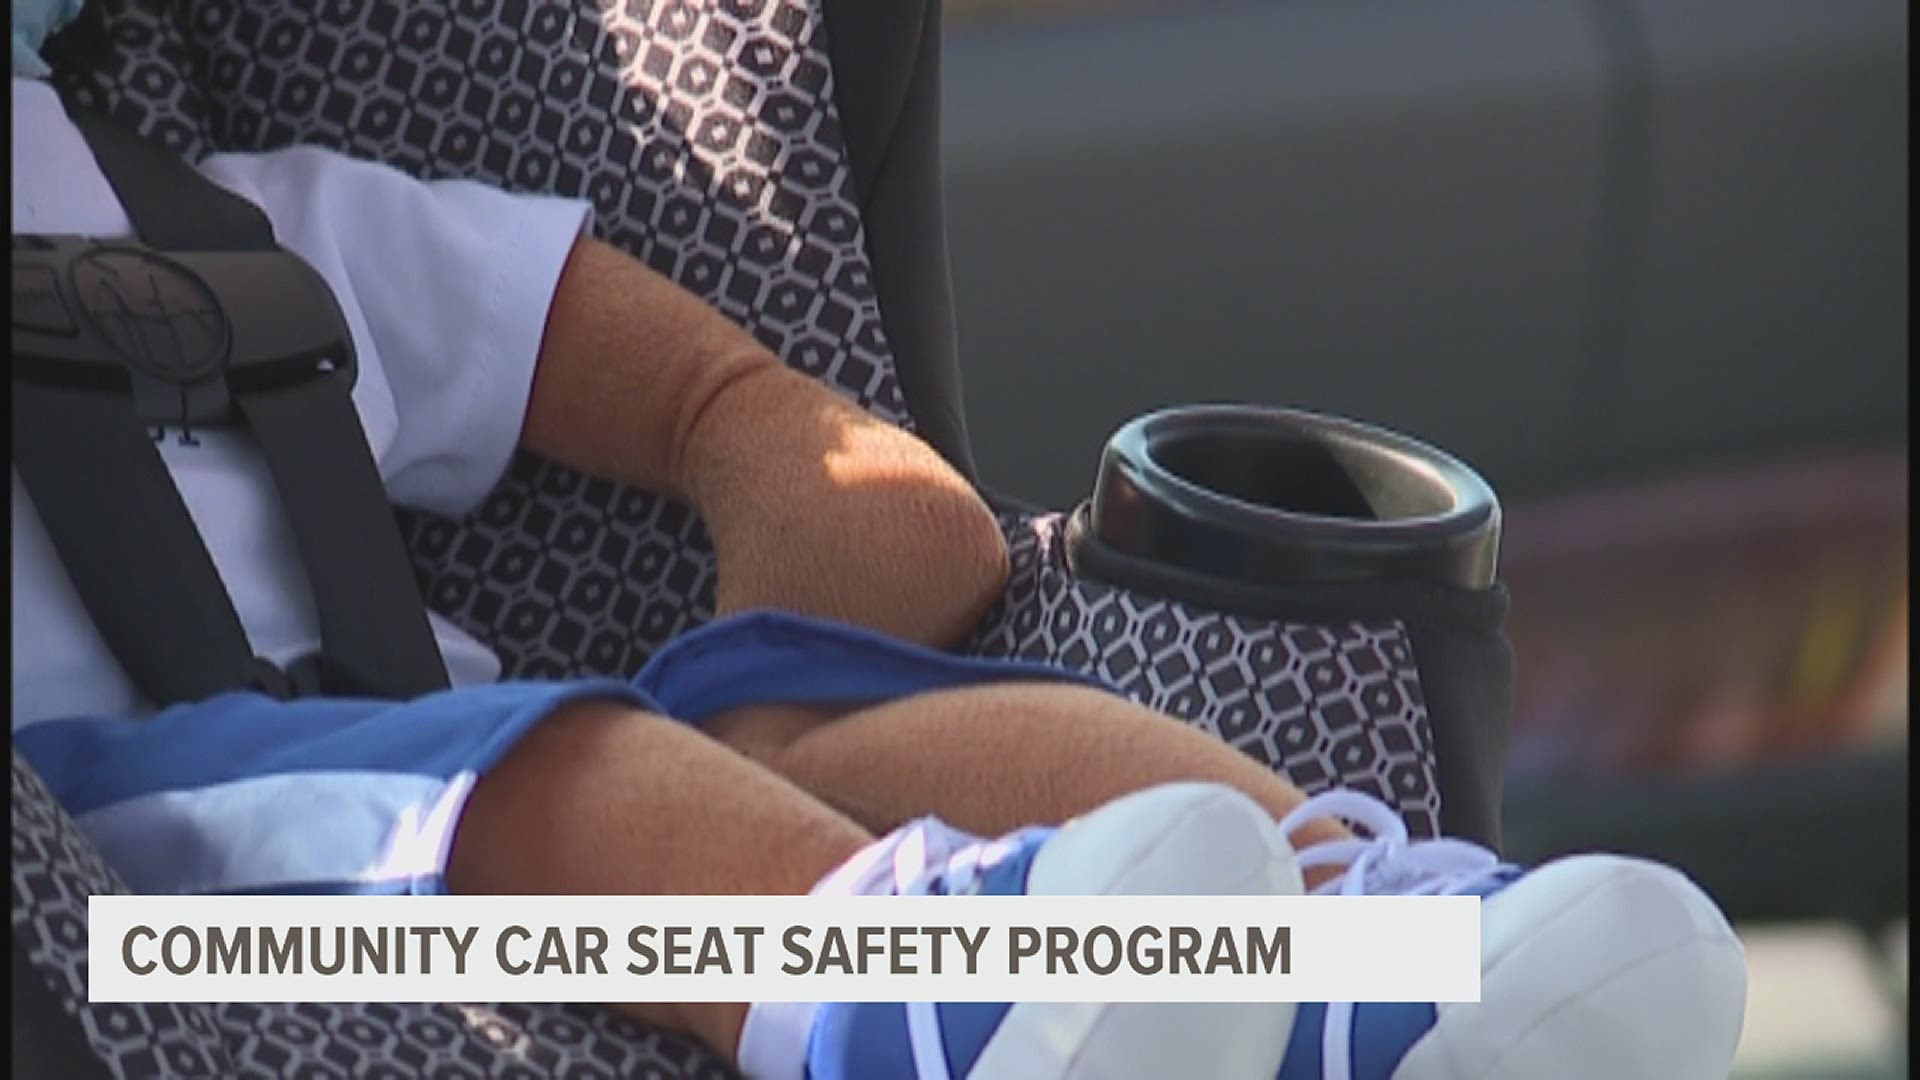 The program's goal is to ease the financial burden for families in need of a car seat and provide safety education.